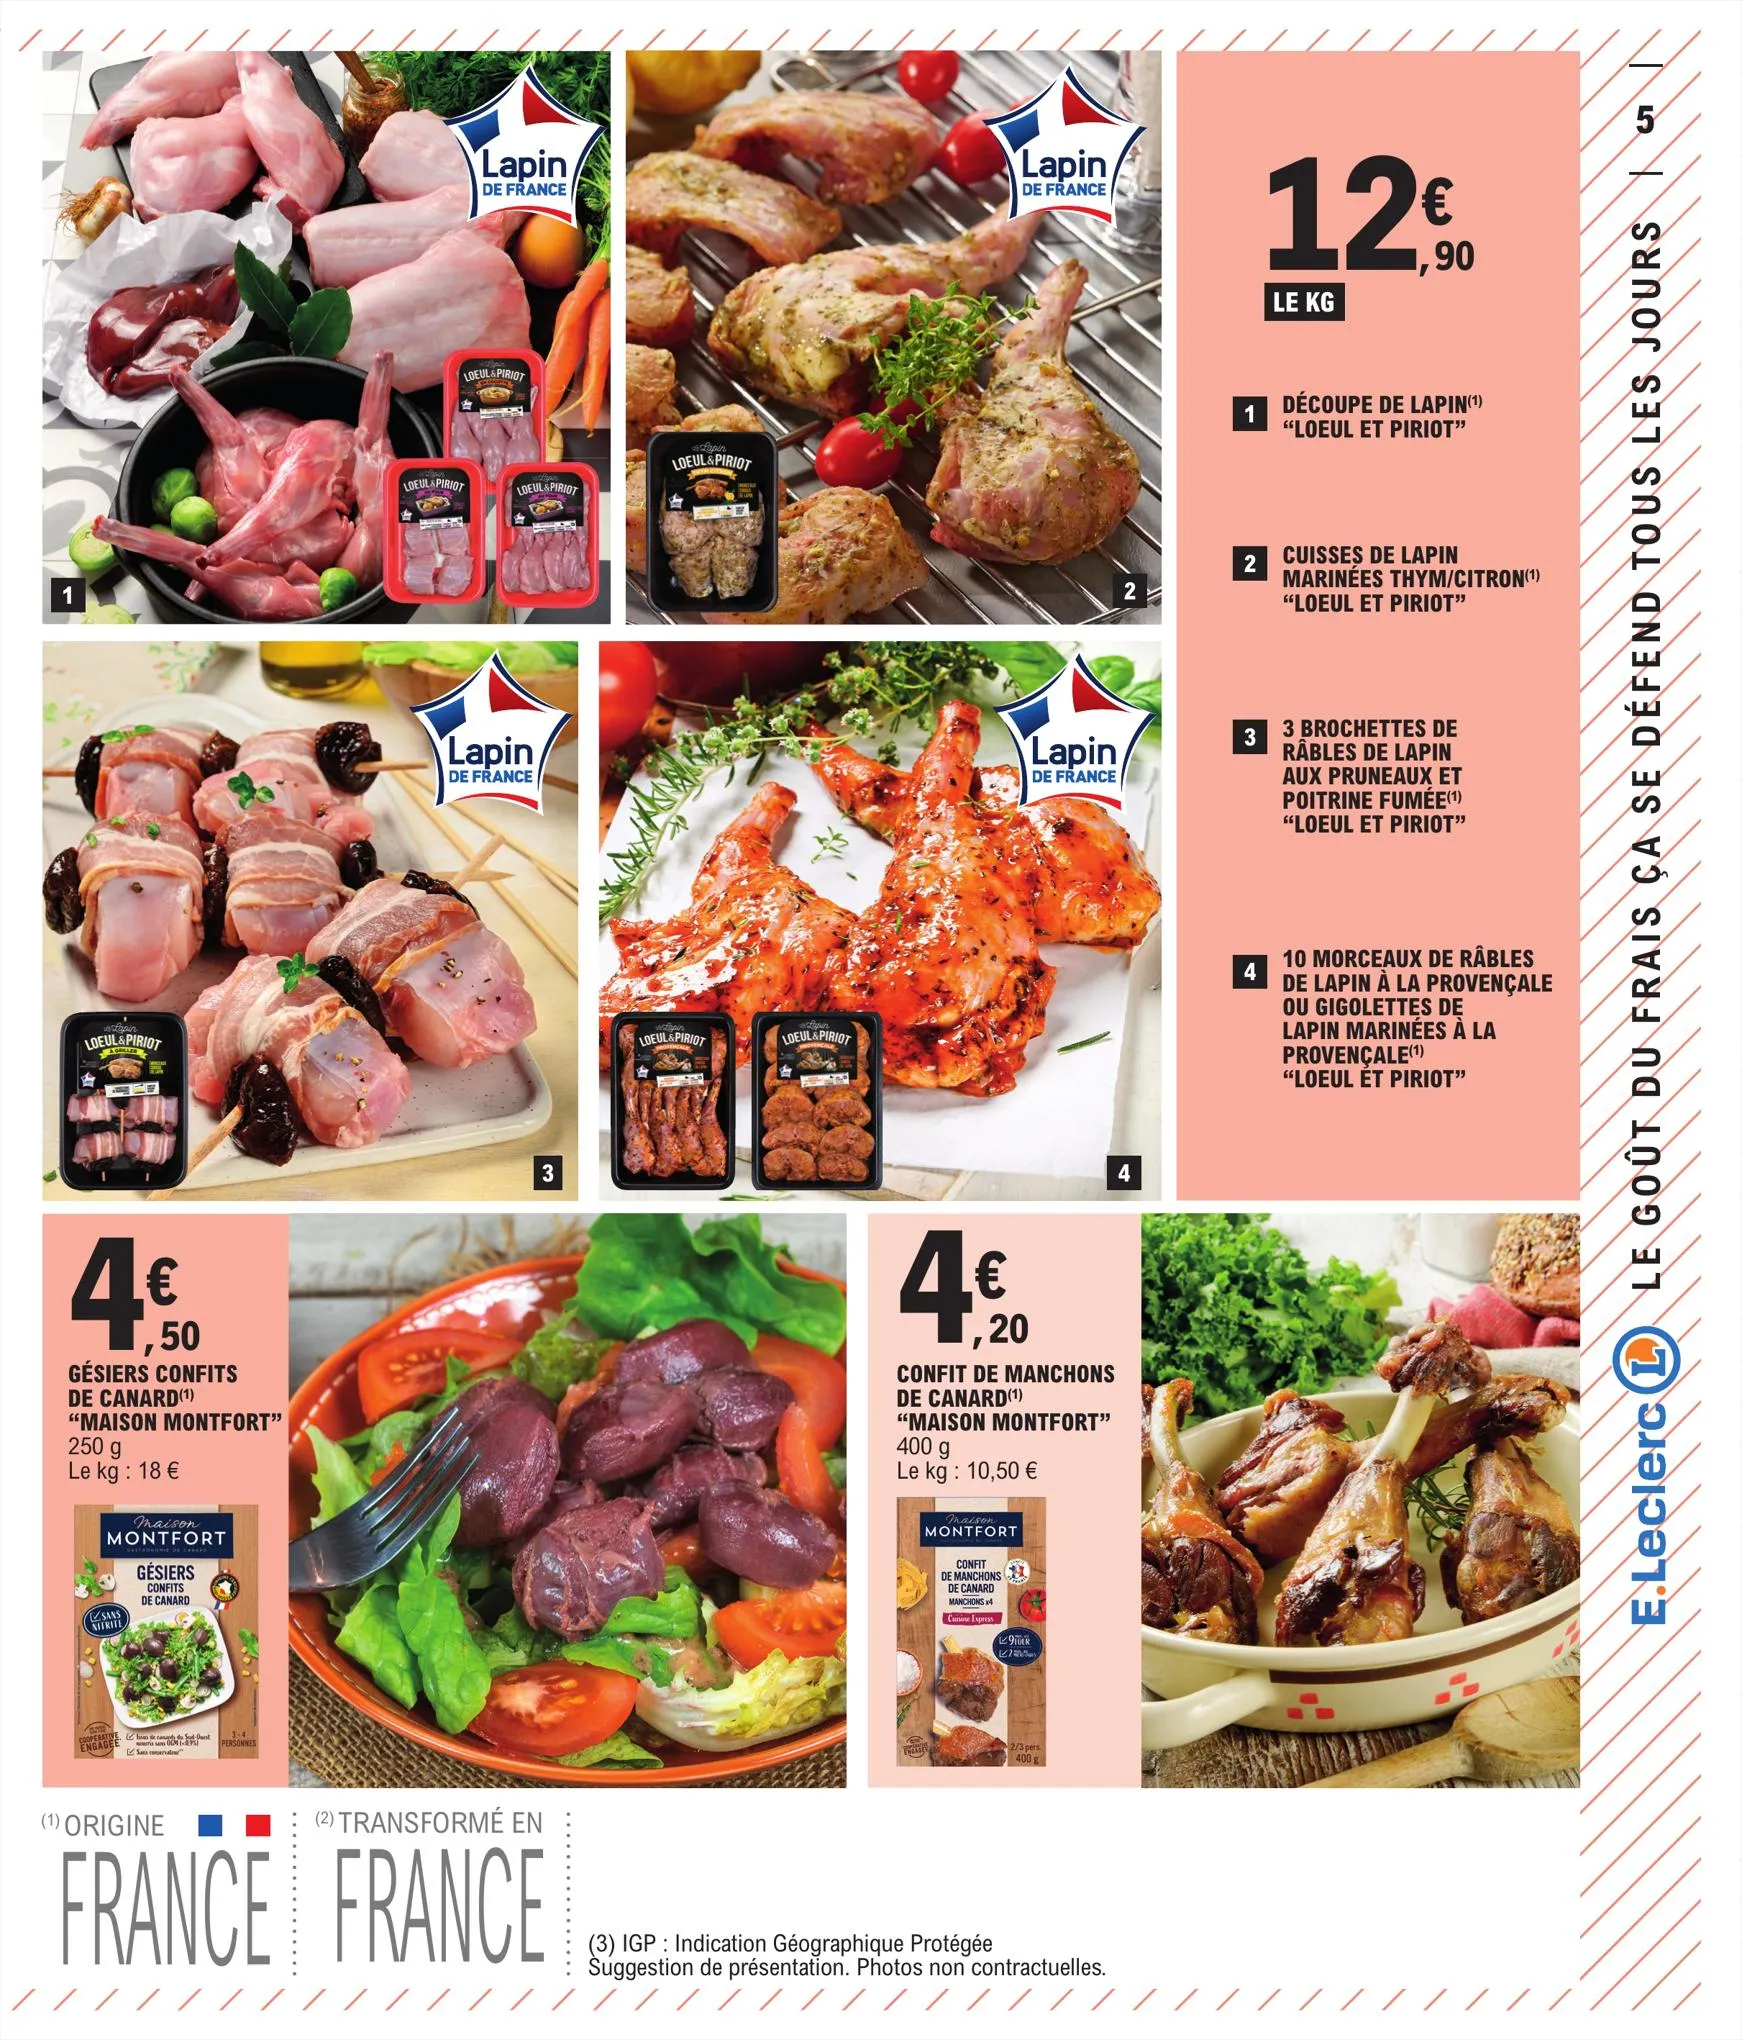 Catalogue Relance Alimentaire 10 - Mixte, page 00005